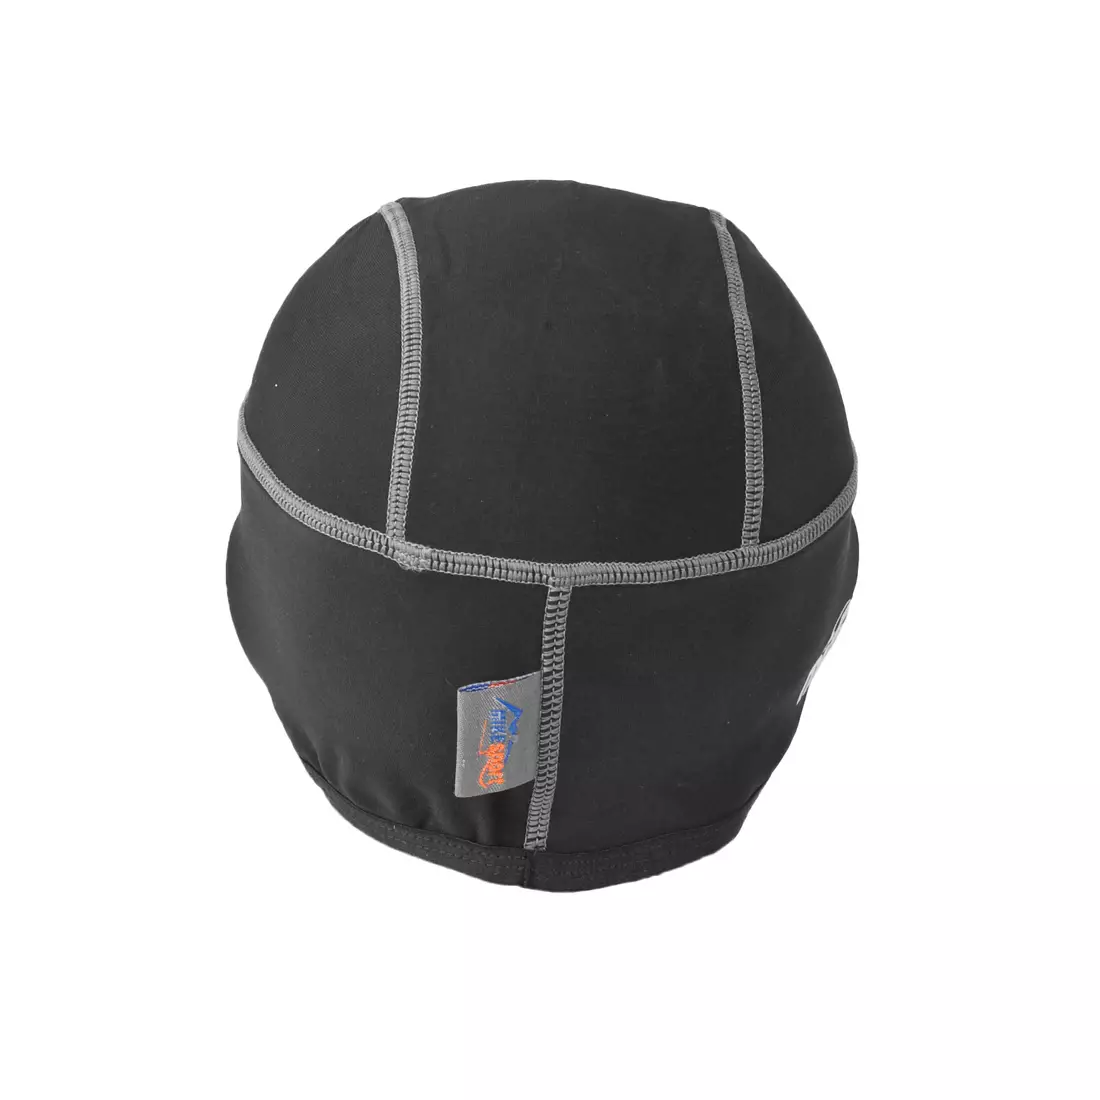 MikeSPORT 2014-W 1080 insulated hat